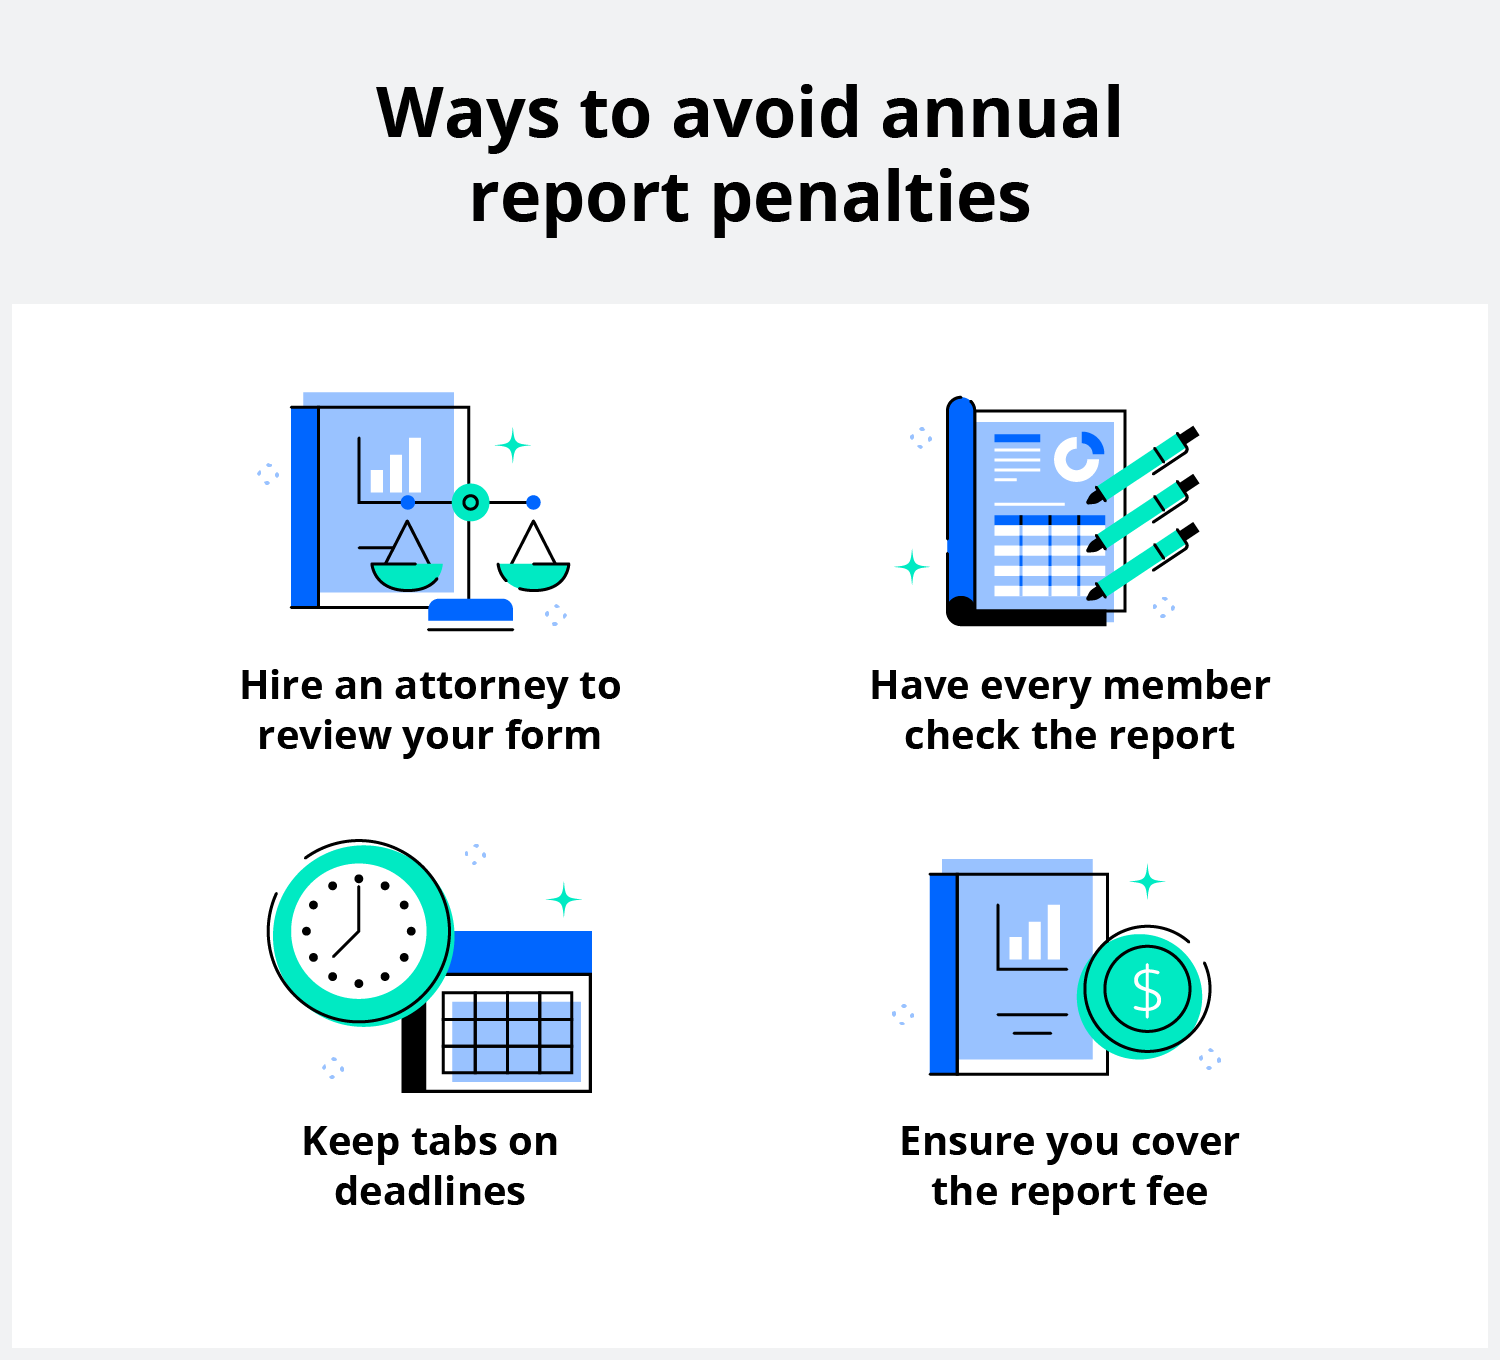 Learn the ways you can avoid penalties for not filing an annual report or for filing an incomplete or incorrect report